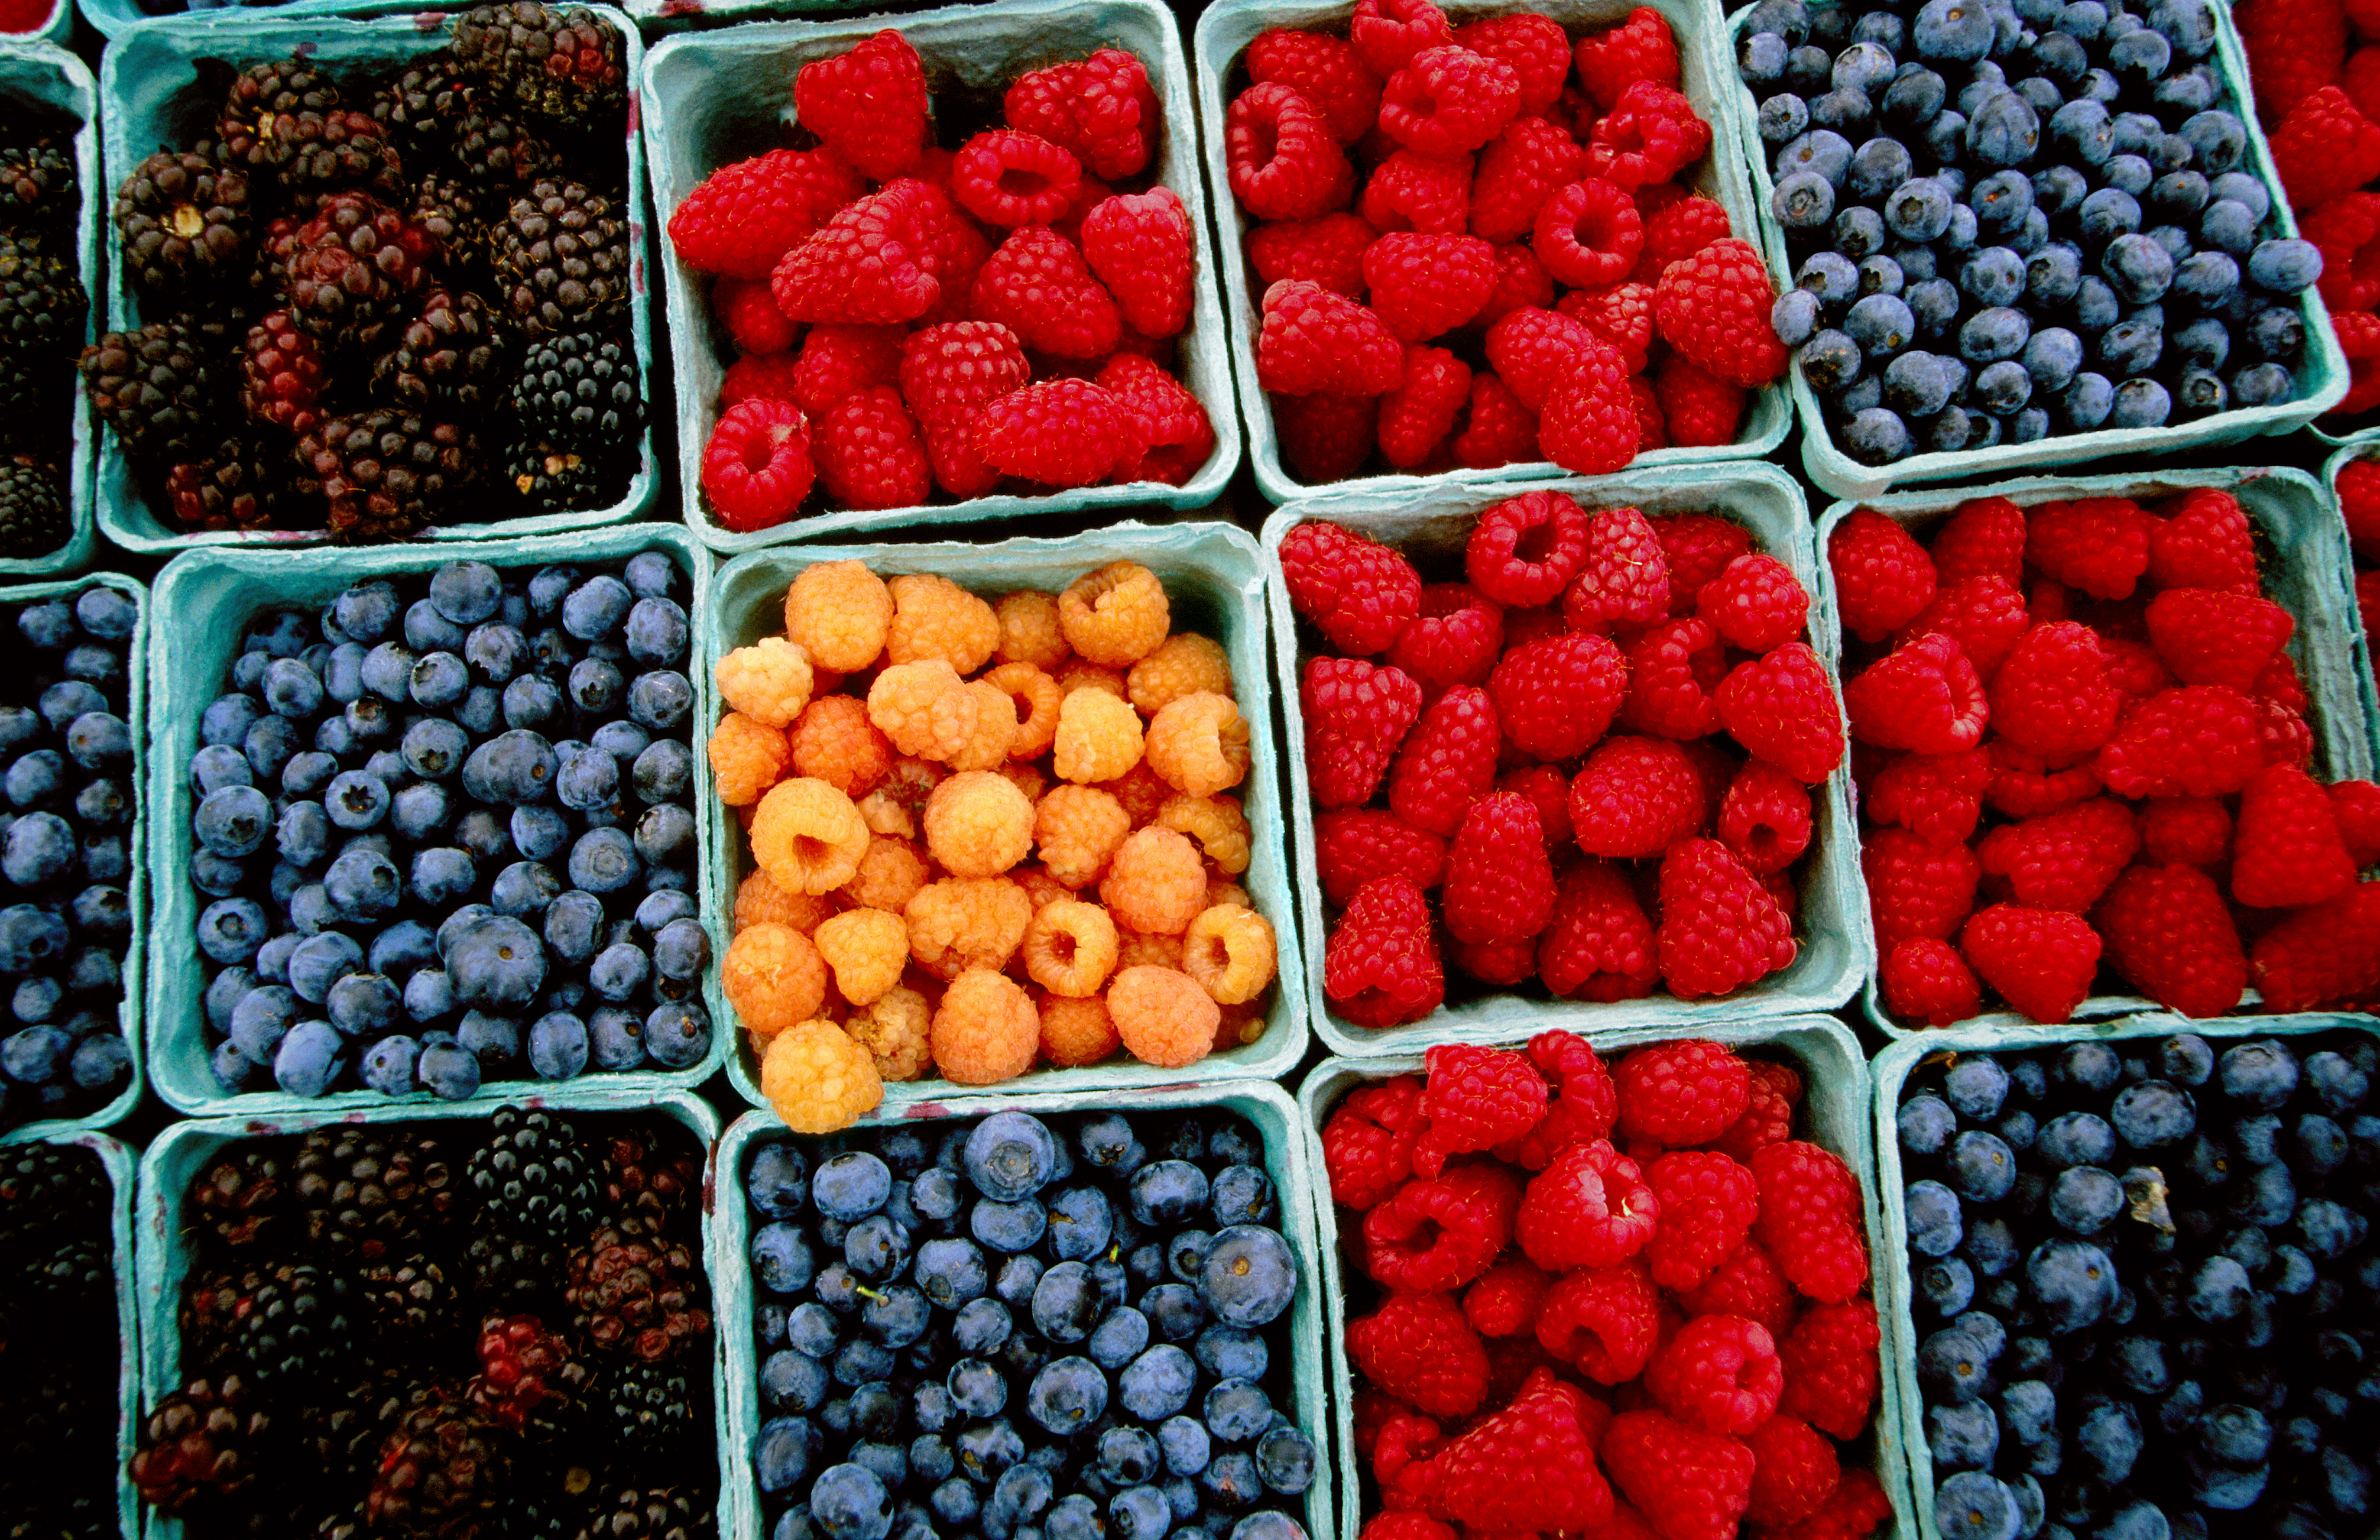 A collection of berries.